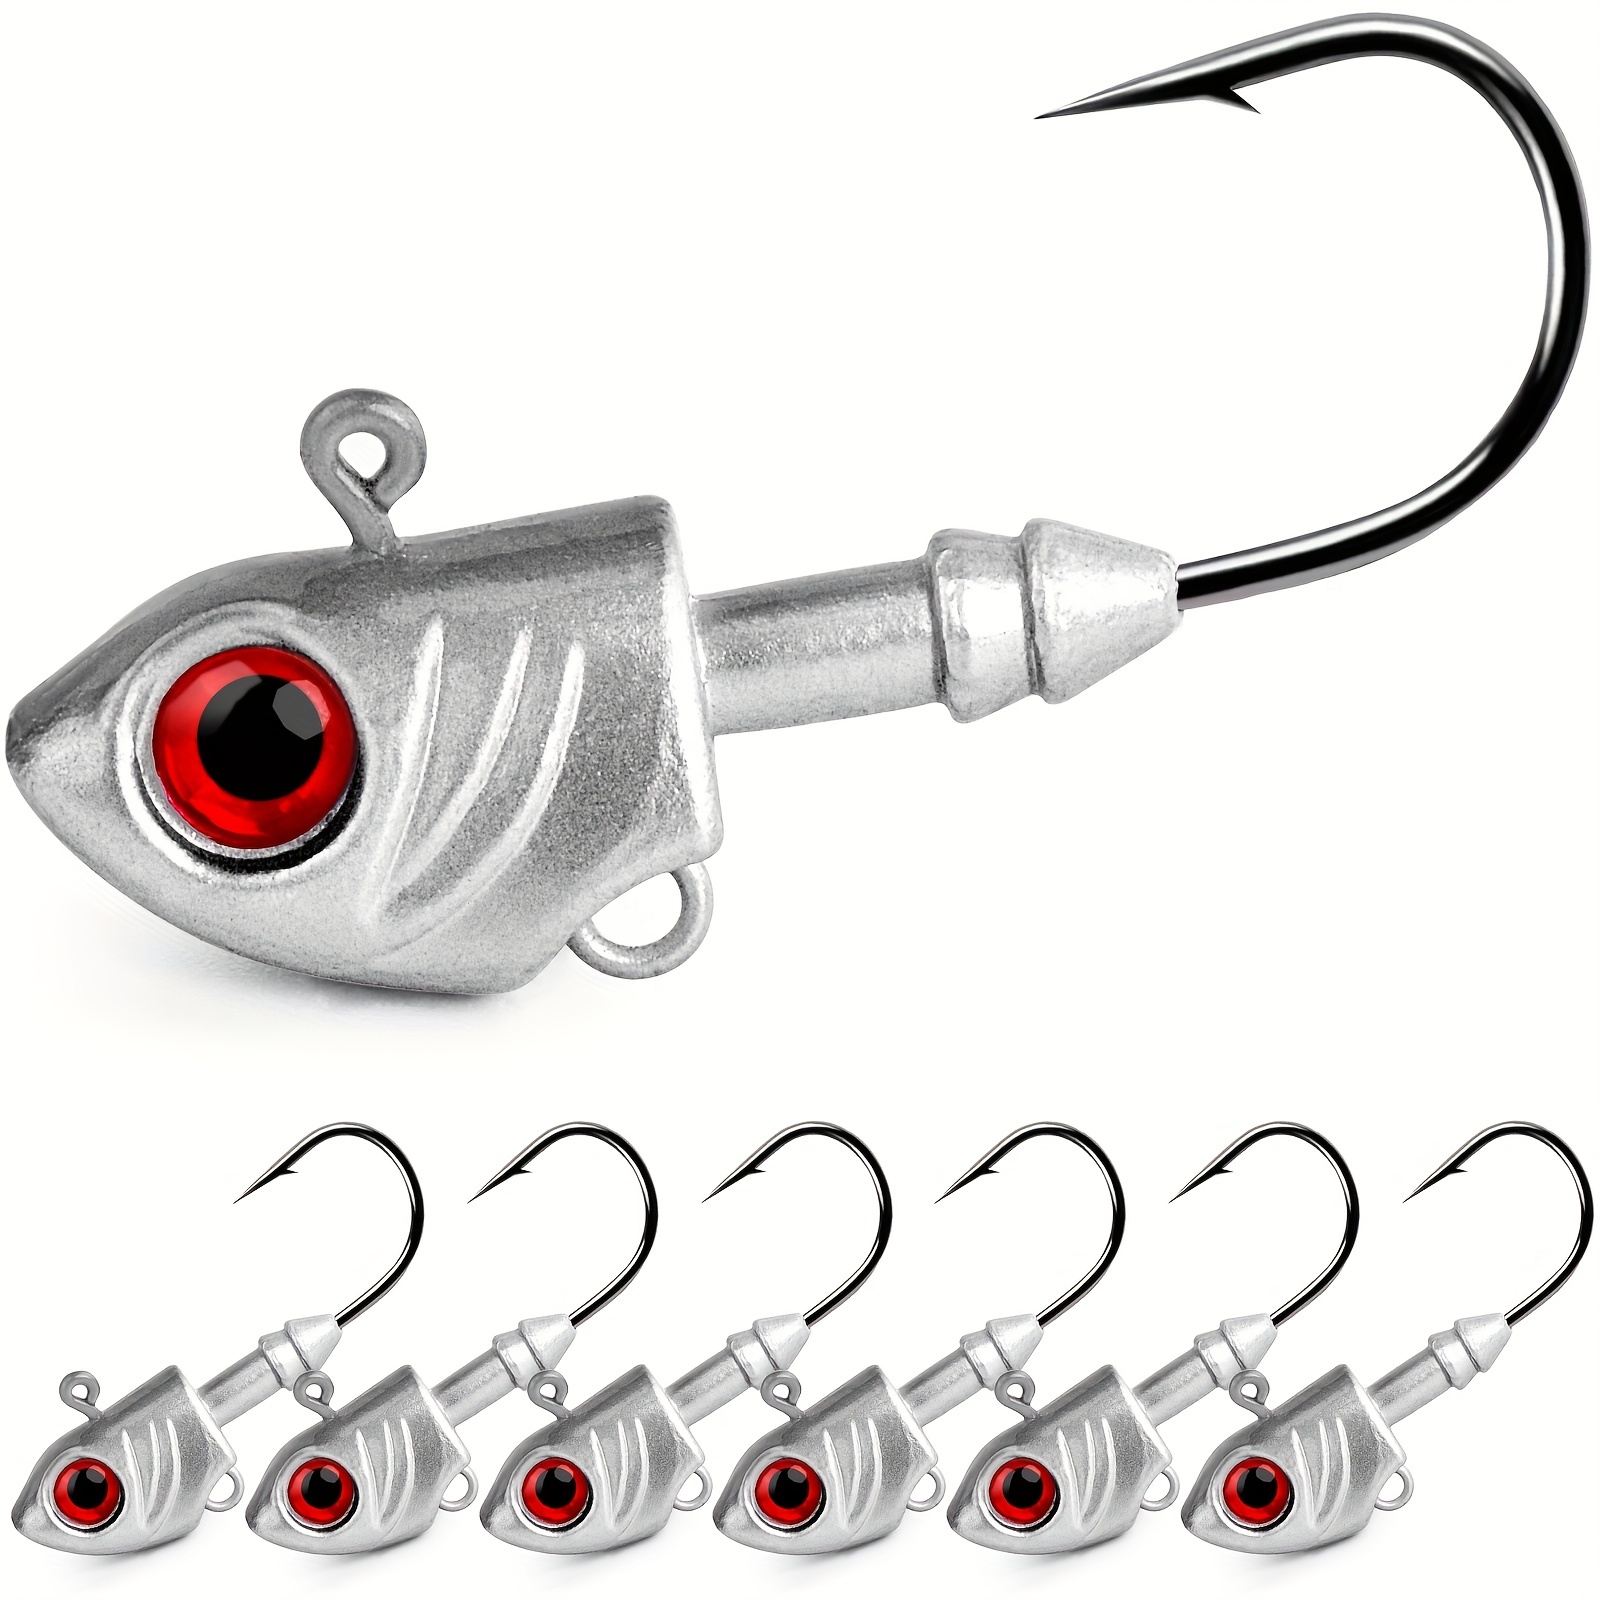 25pcs Fishing Jig Heads Kit, Football Painted Head Jig Hook with Double Eye  Glow Crappie Bass Jig Head Hooks for Freshwater Saltwater 1/8oz 3/16oz